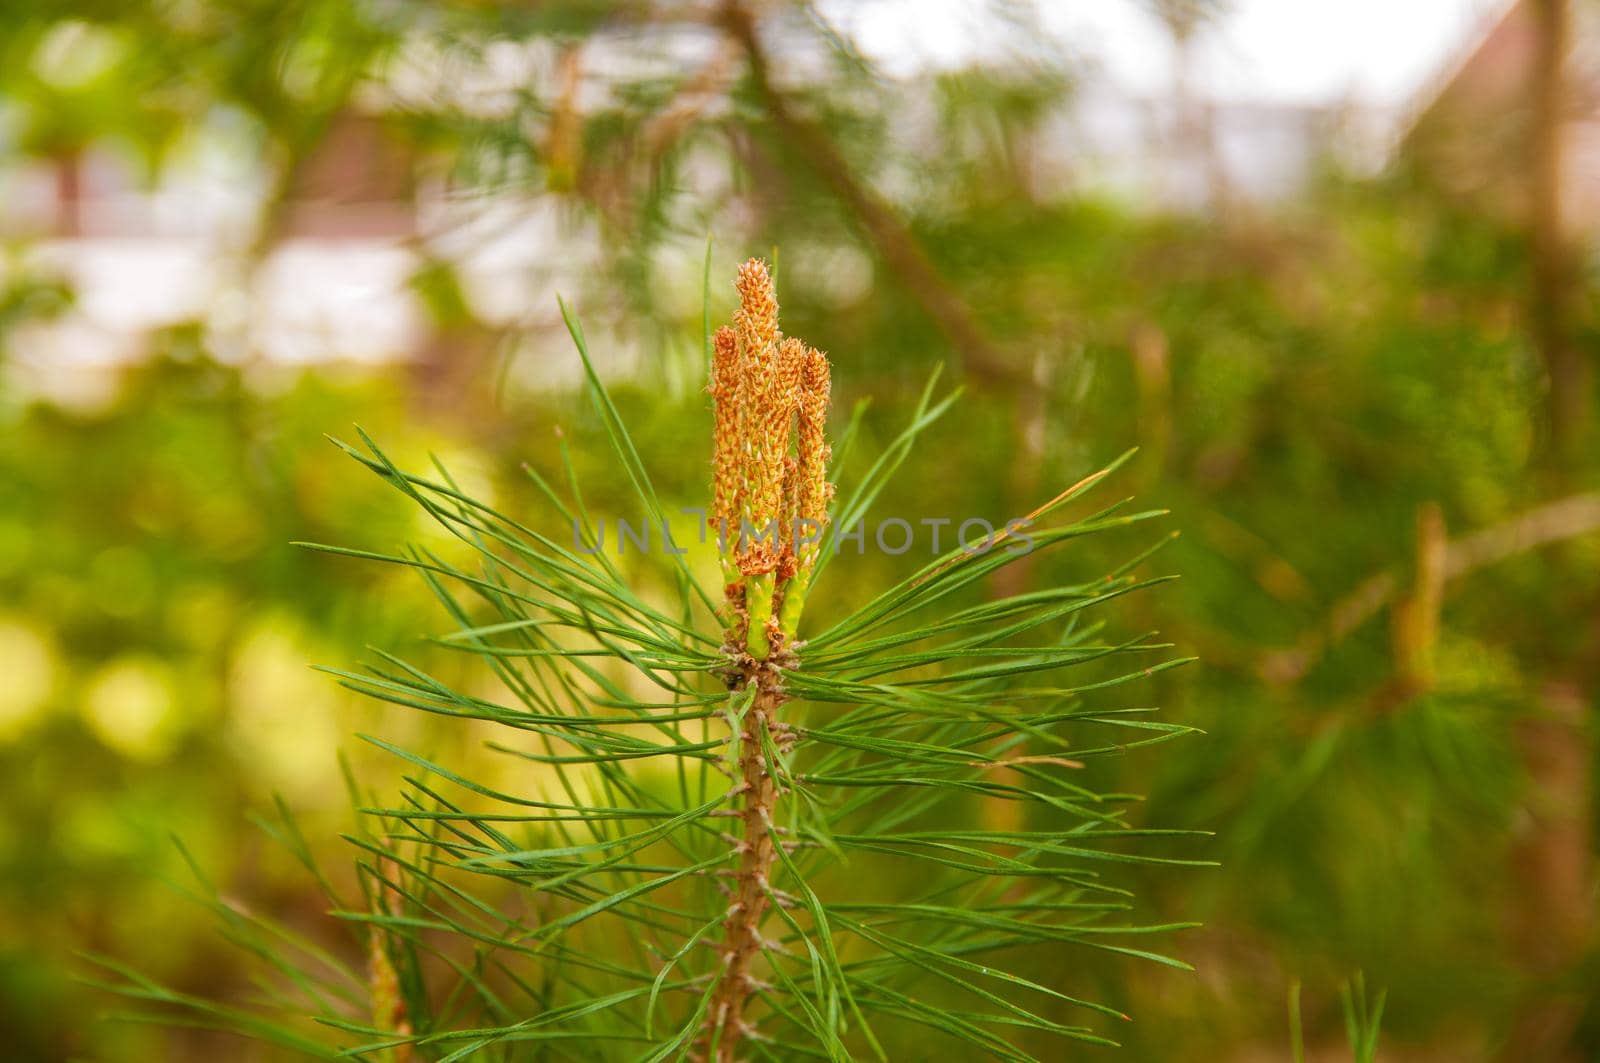 New spring shoots of evergreen tree Pine  with  buds on a young pine branch growing in evergreen coniferous forest.